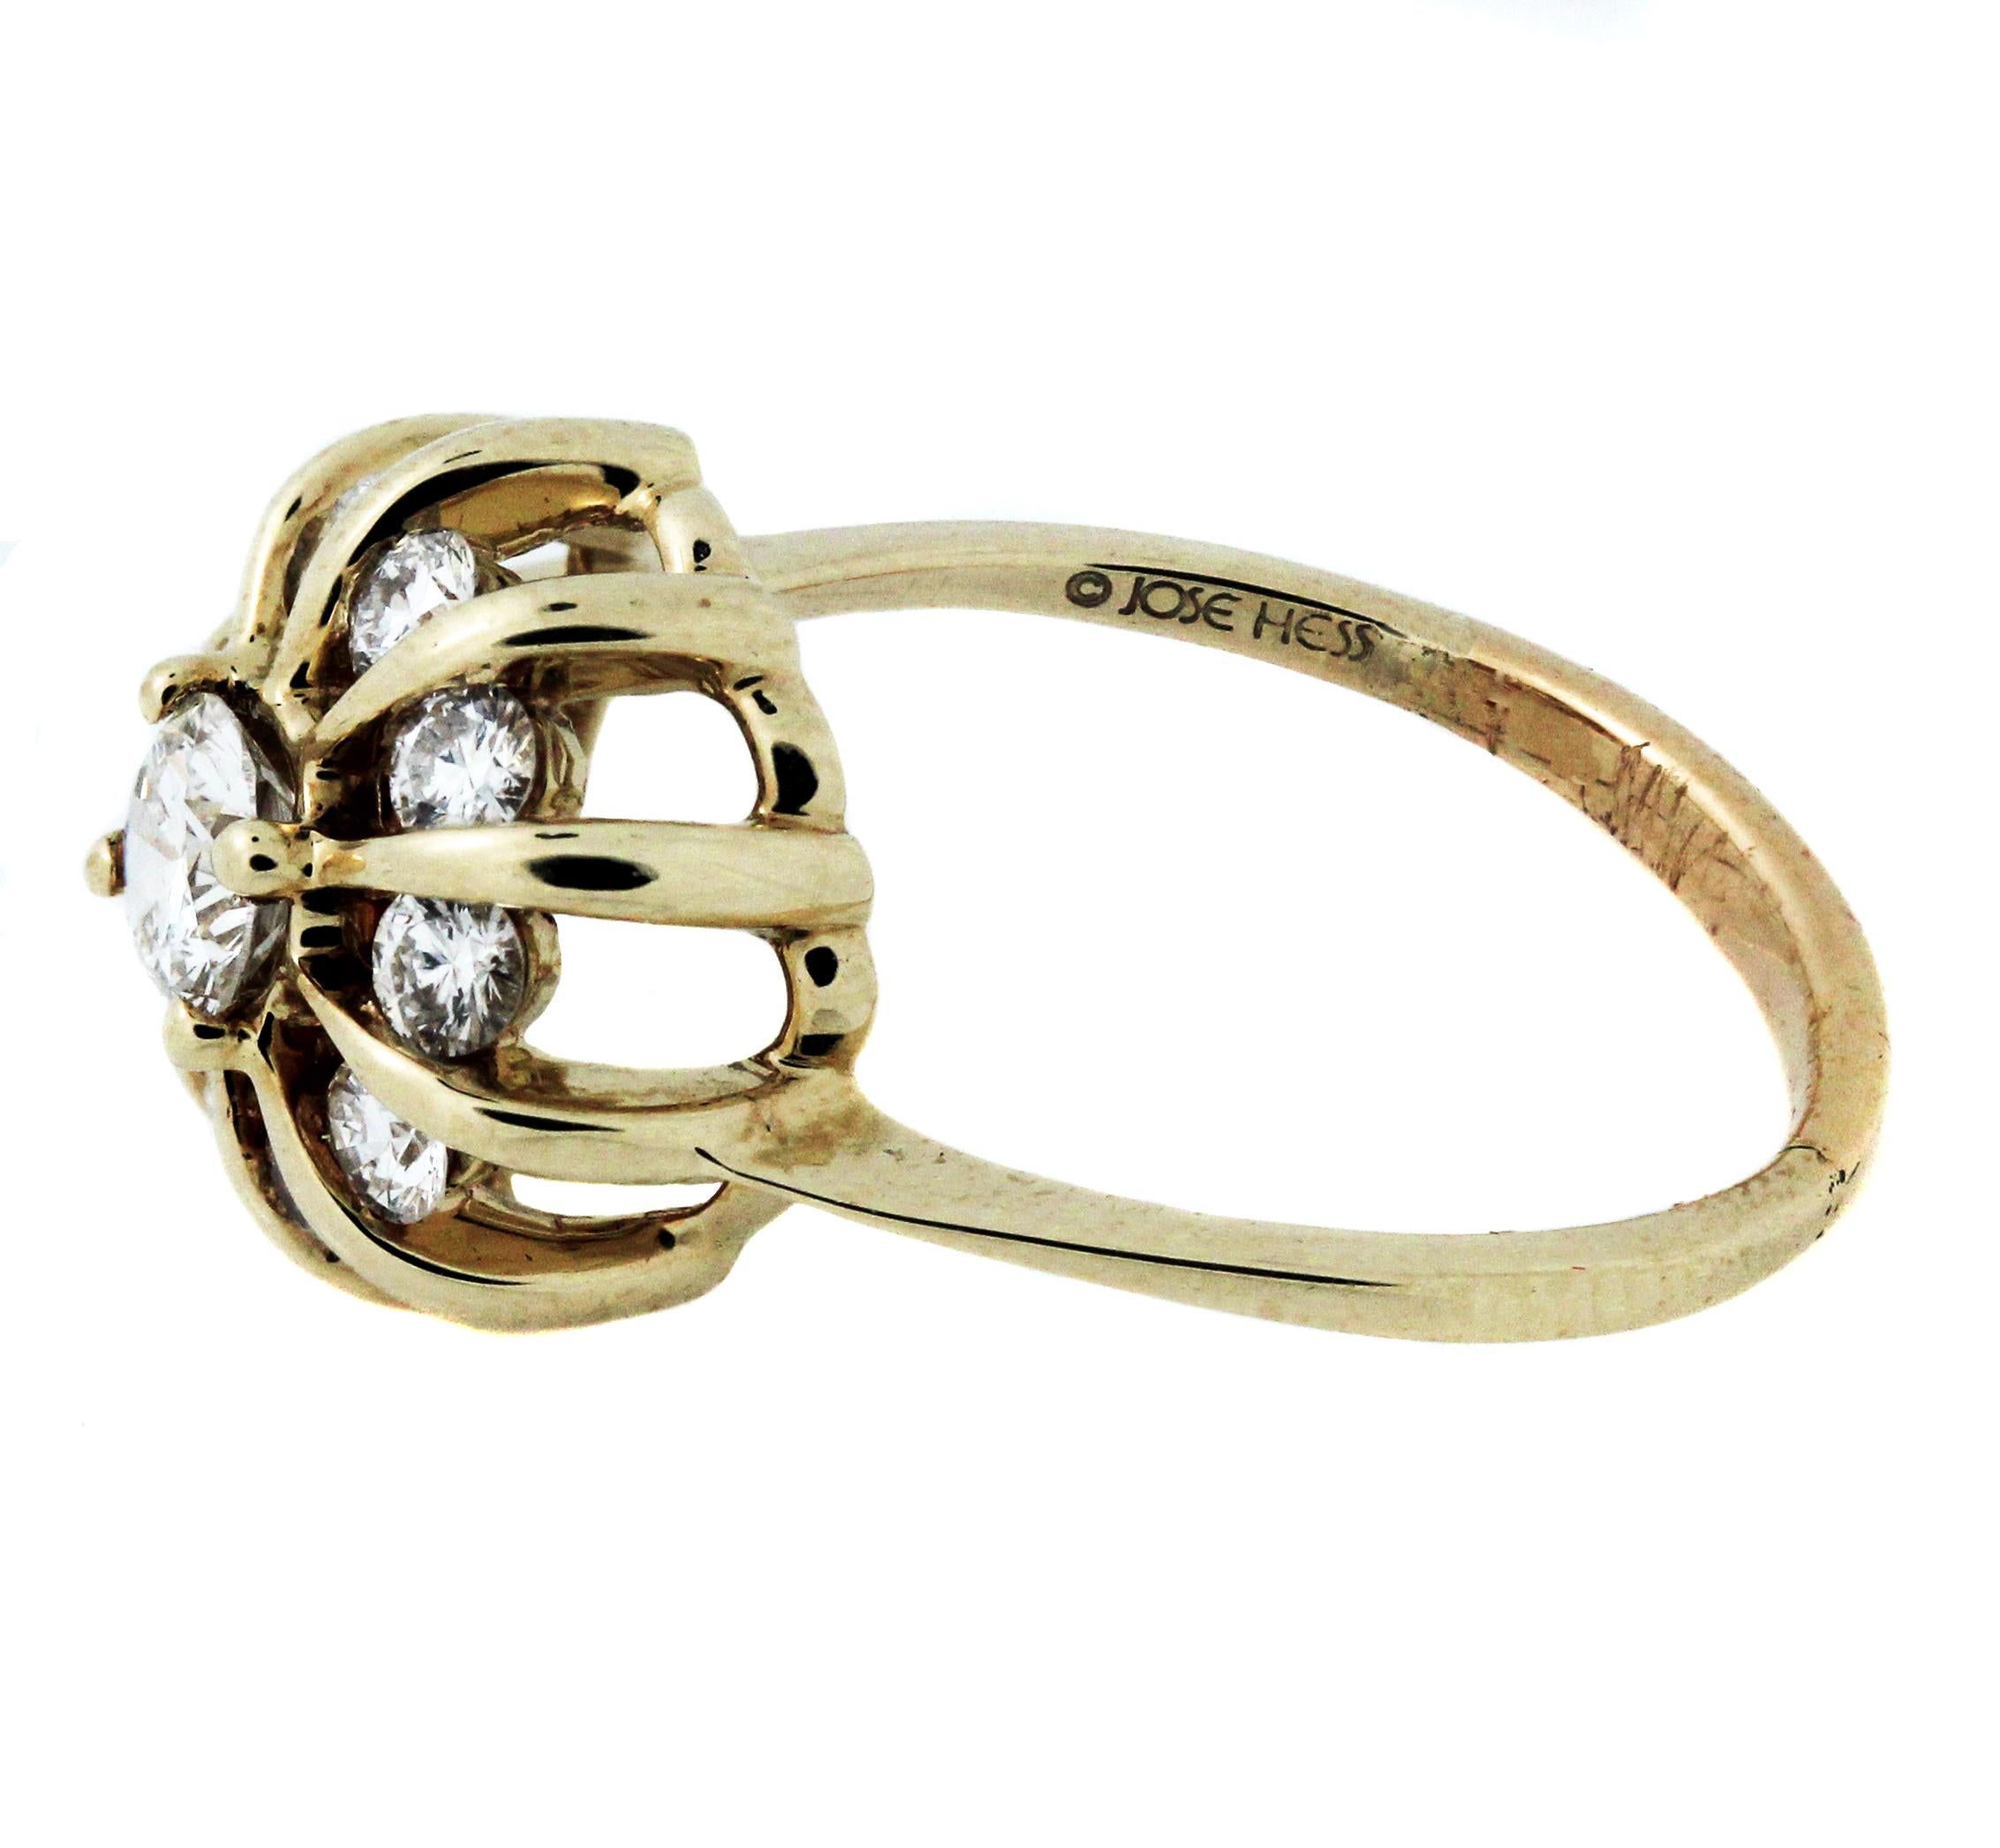 Round Cut Jose Hess Yellow Gold and Diamond Cocktail Ring